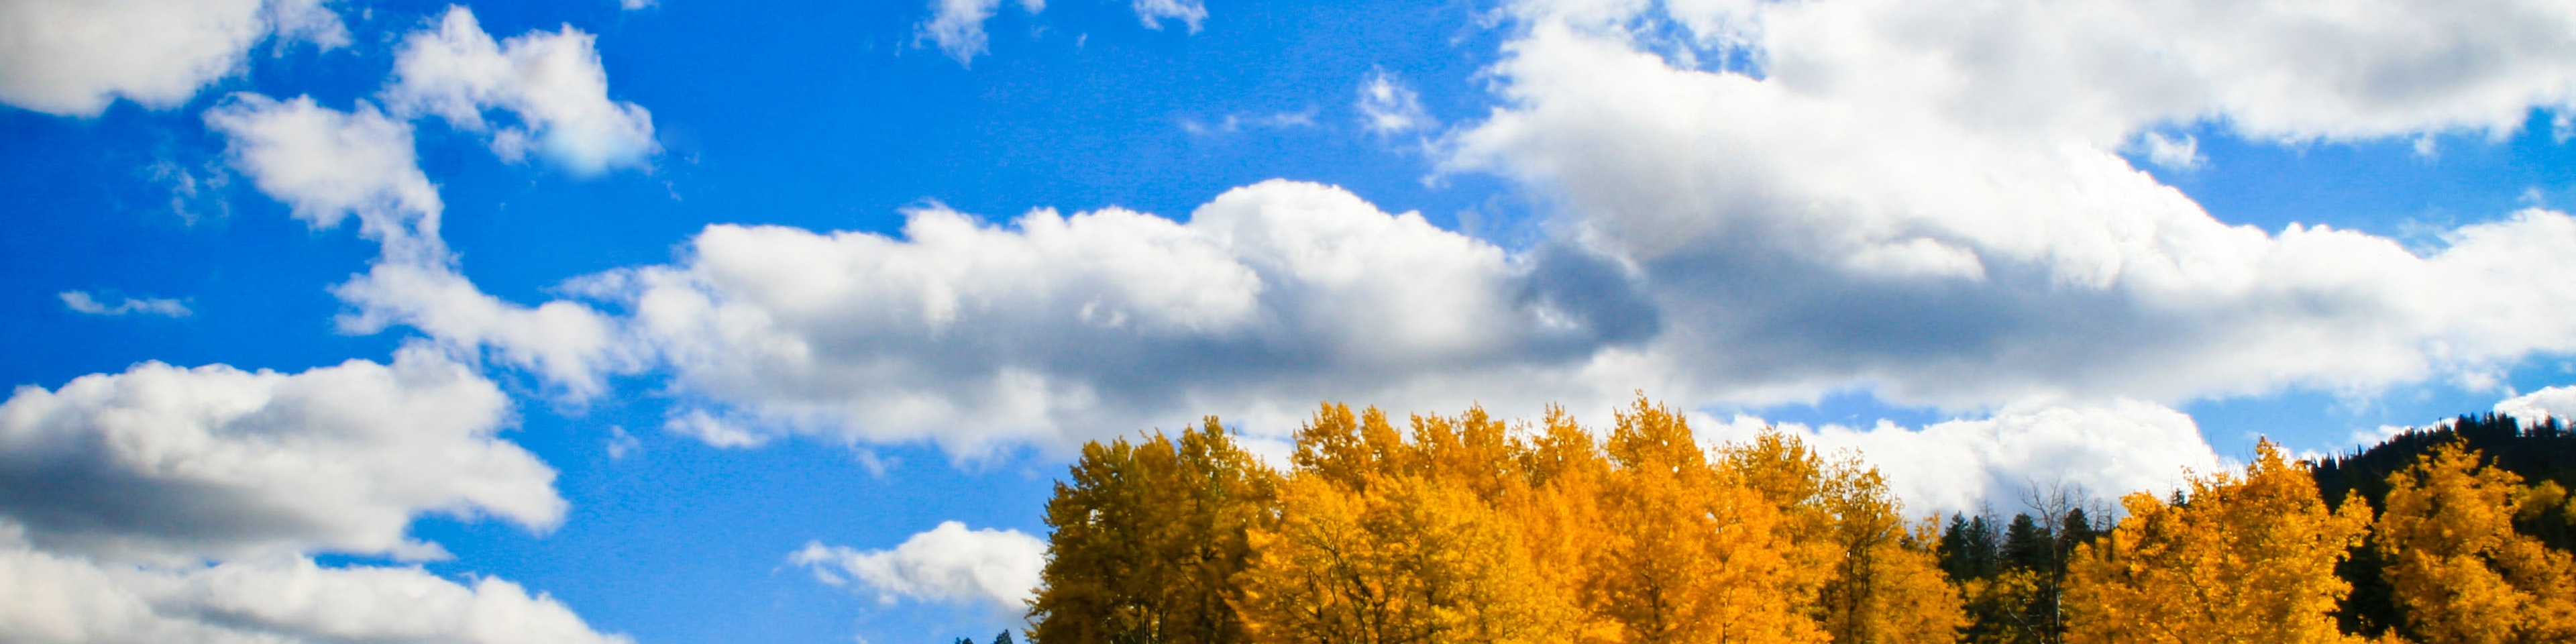 Fall in Victor Idaho. Yellow grove of aspens on a blue sky day with clouds. 